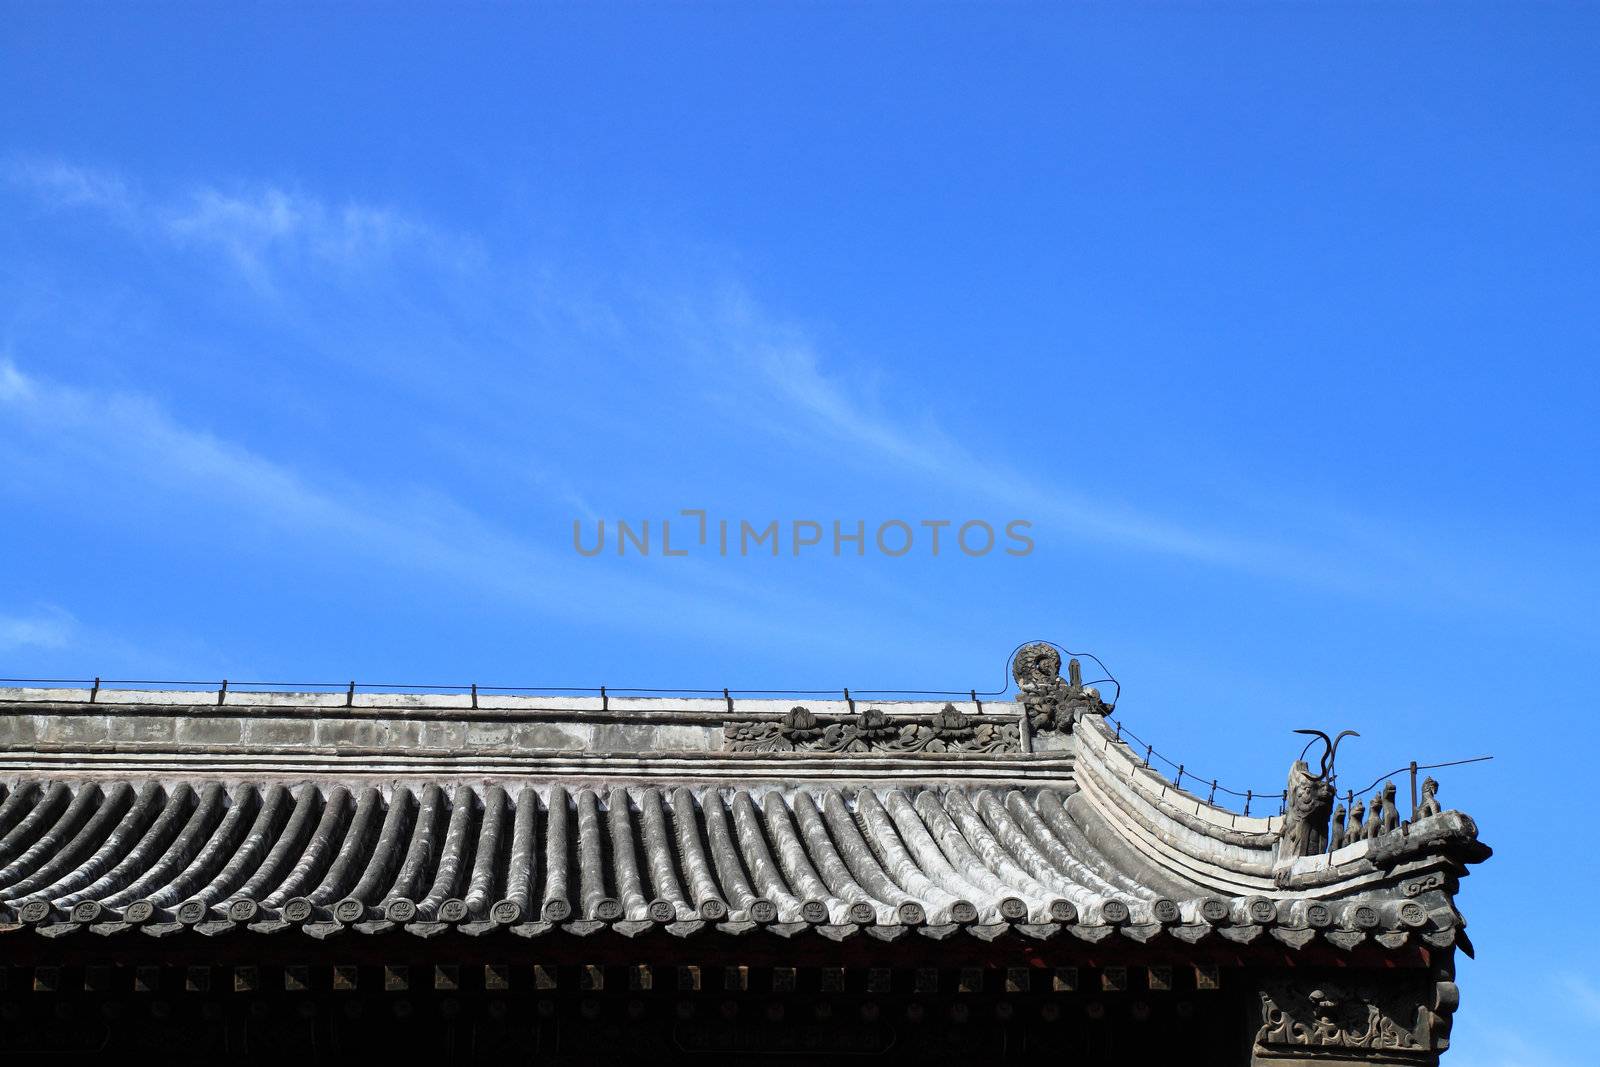 Chinese roof by geargodz